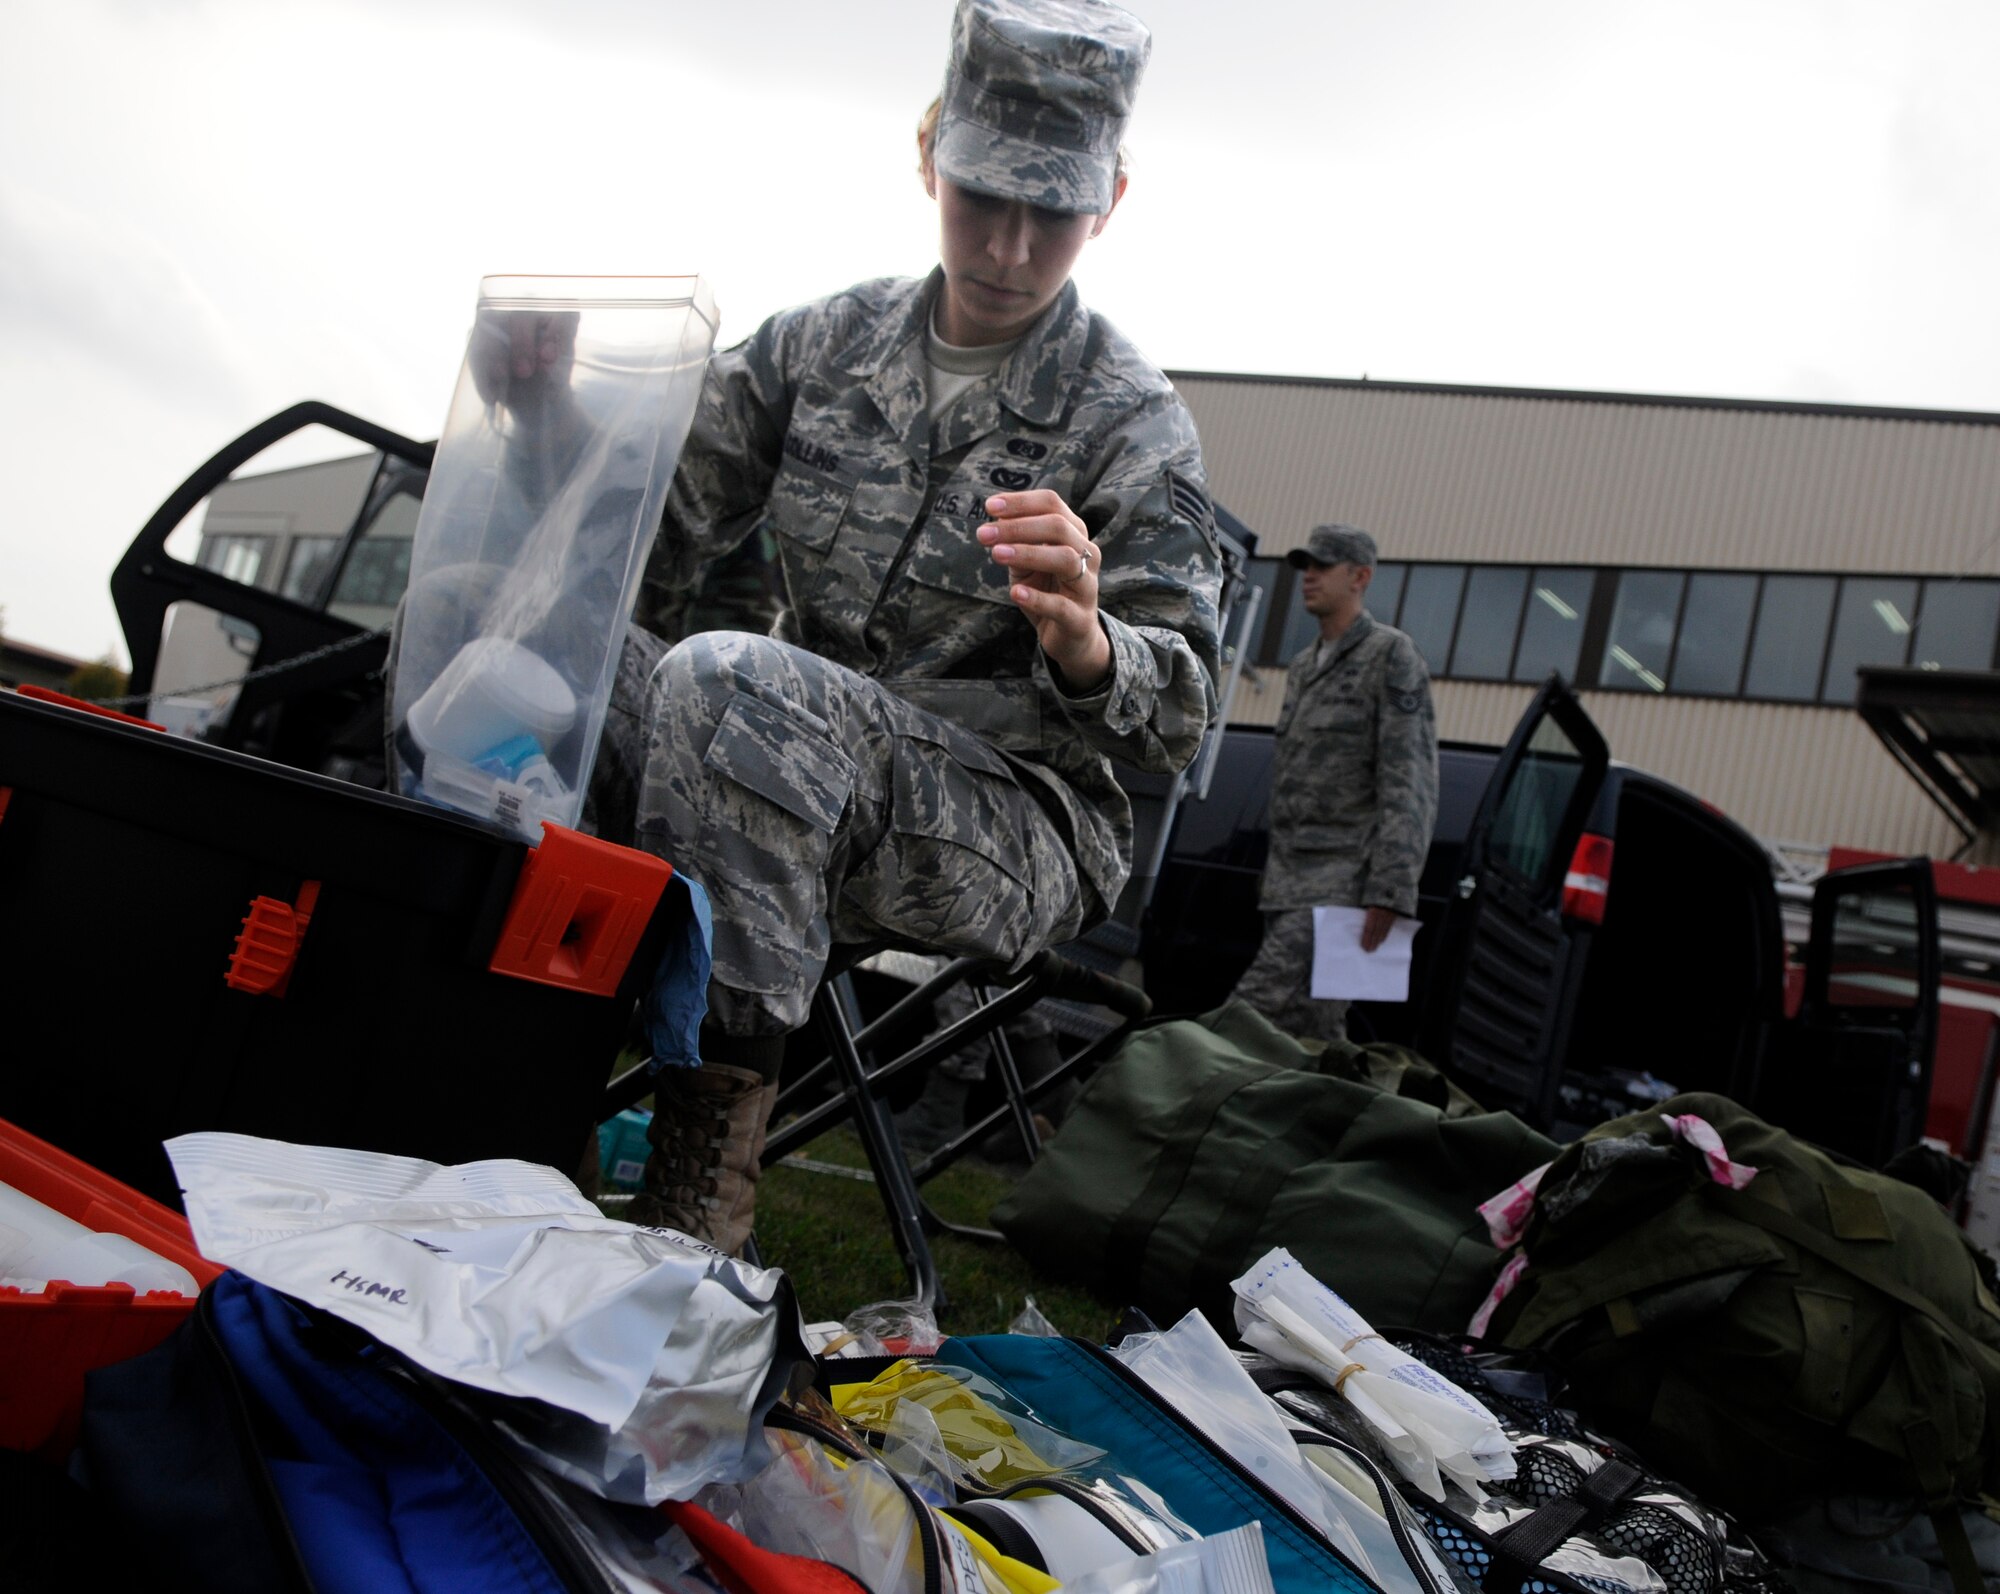 SPANGDAHLEM AIR BASE, Germany – Senior Airman Briana Collins, 52nd Civil Engineer Squadron, prepares specimen bags to use during an all hazards response training emergency management and mass casualty exercise Oct. 7. The specimen bags were later used to help identify what simulated chemical was released in the air. (U.S. Air Force photo/Airman 1st Class Staci Miller)